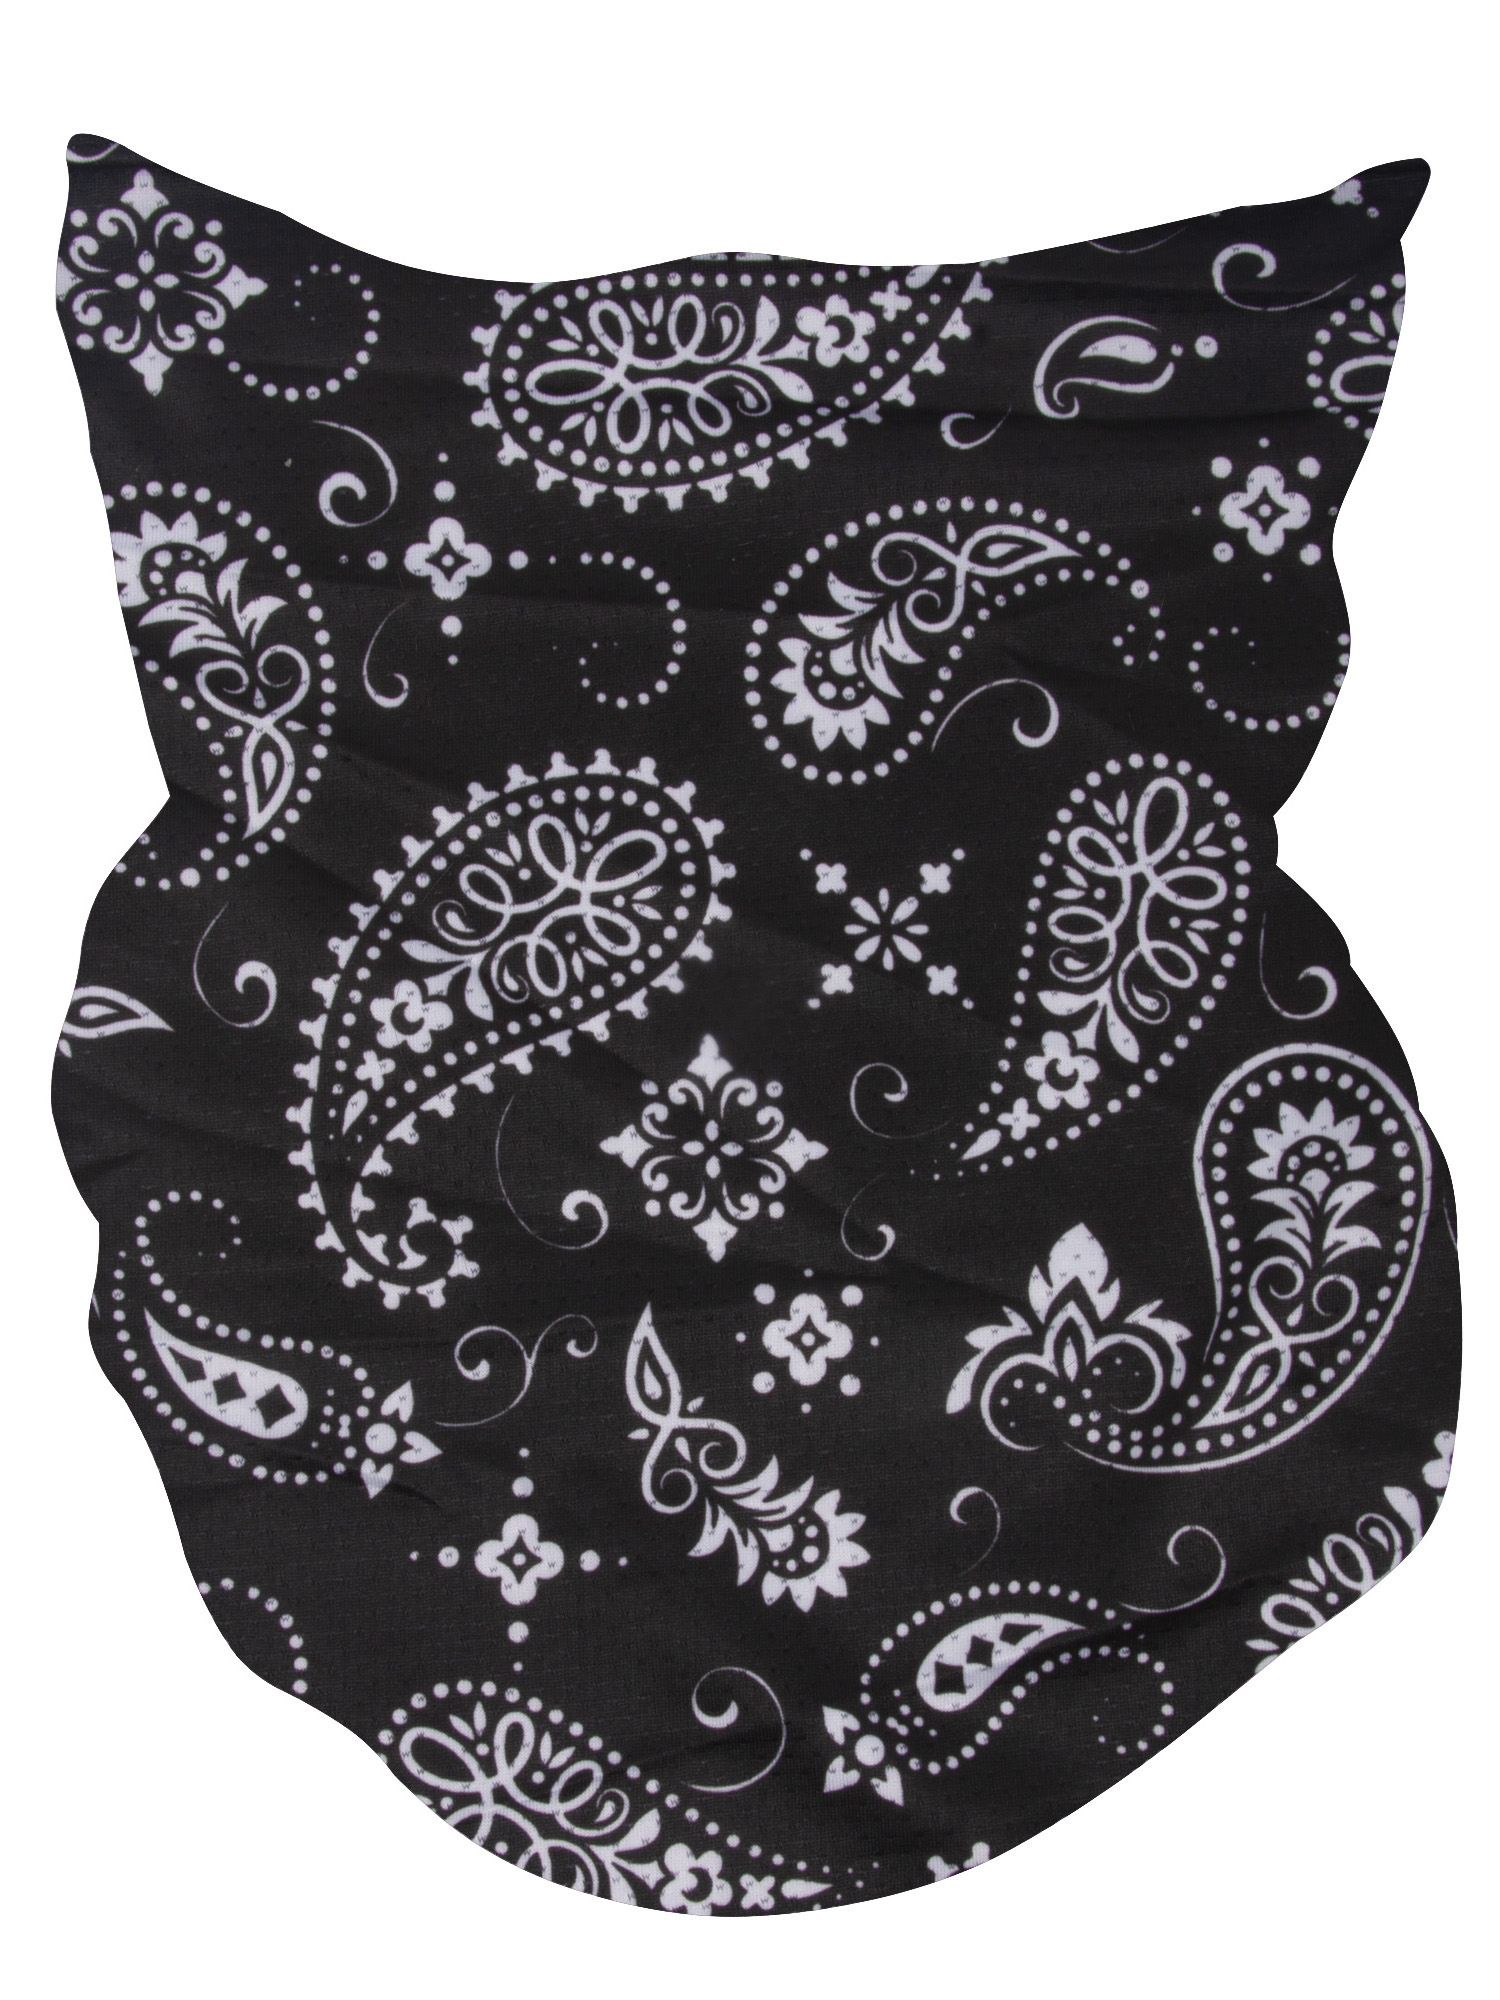 Top Headwear Multifunctional Face Covering Neck Gaiter Scarf - Black Paisley - image 1 of 2